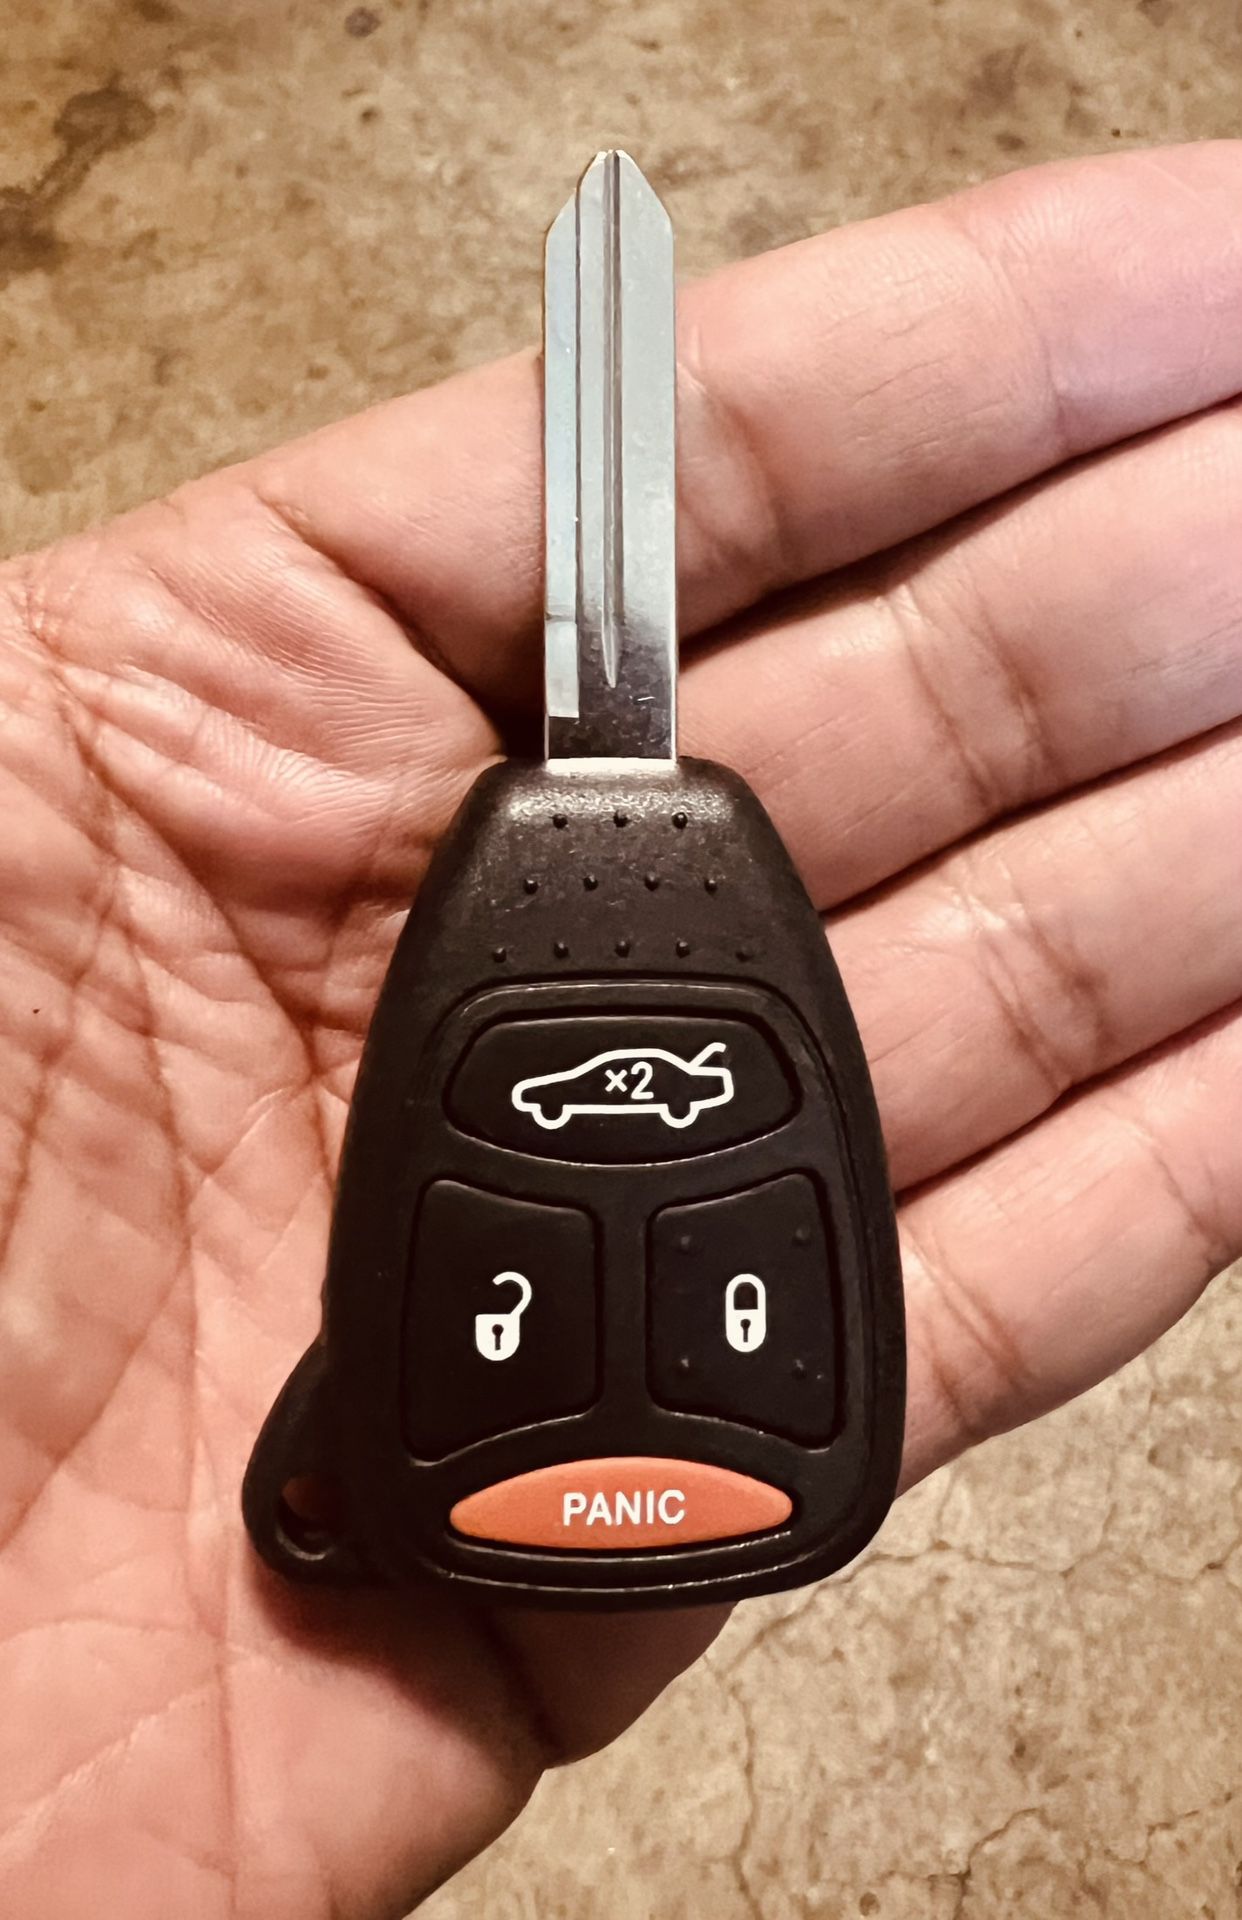 [$100 in Upland Today] 2004-15 Dodge Chrysler Jeep Key Copy (Avenger, Liberty, Aspen, 300, Charger, Durango, Magnum, Commander, Grand Cherokee & more)